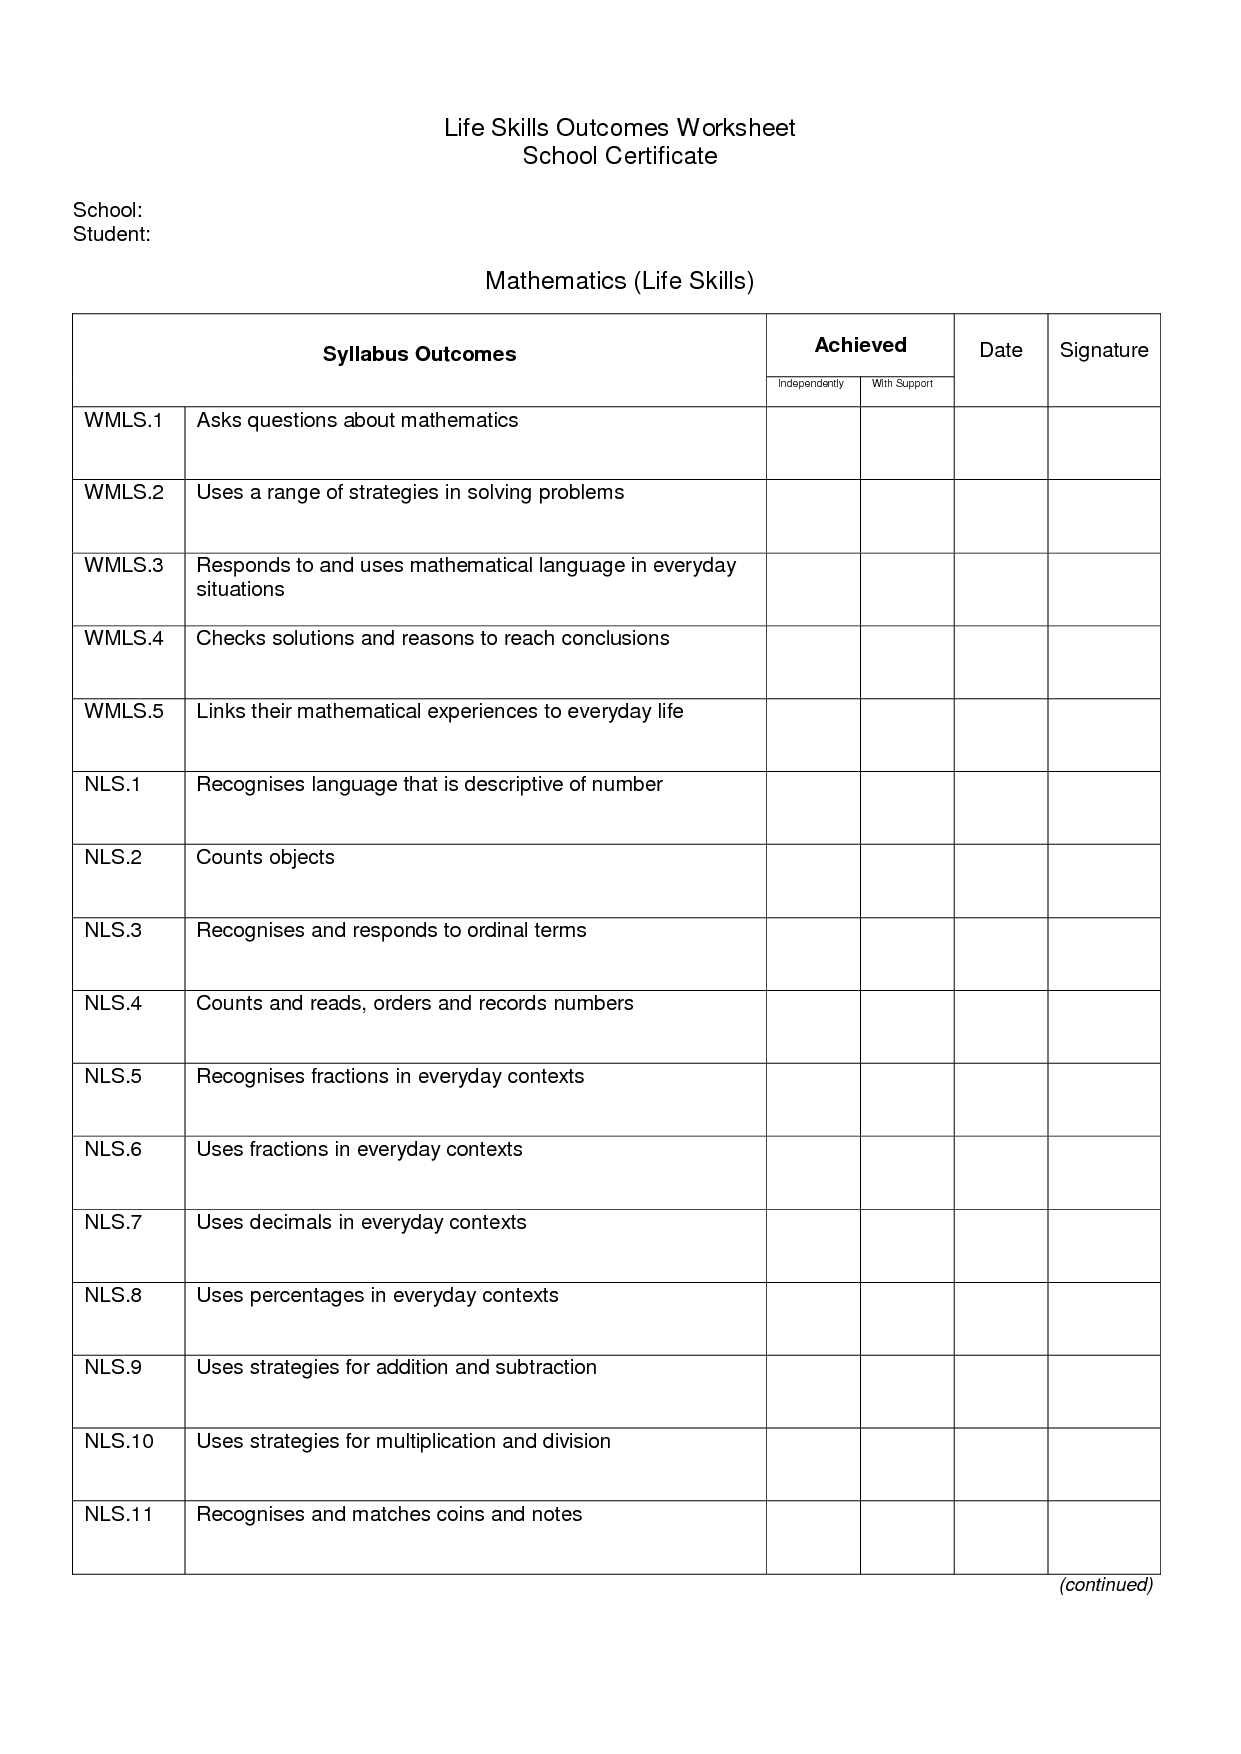 17-best-images-of-healthy-lifestyles-worksheets-for-adults-healthy